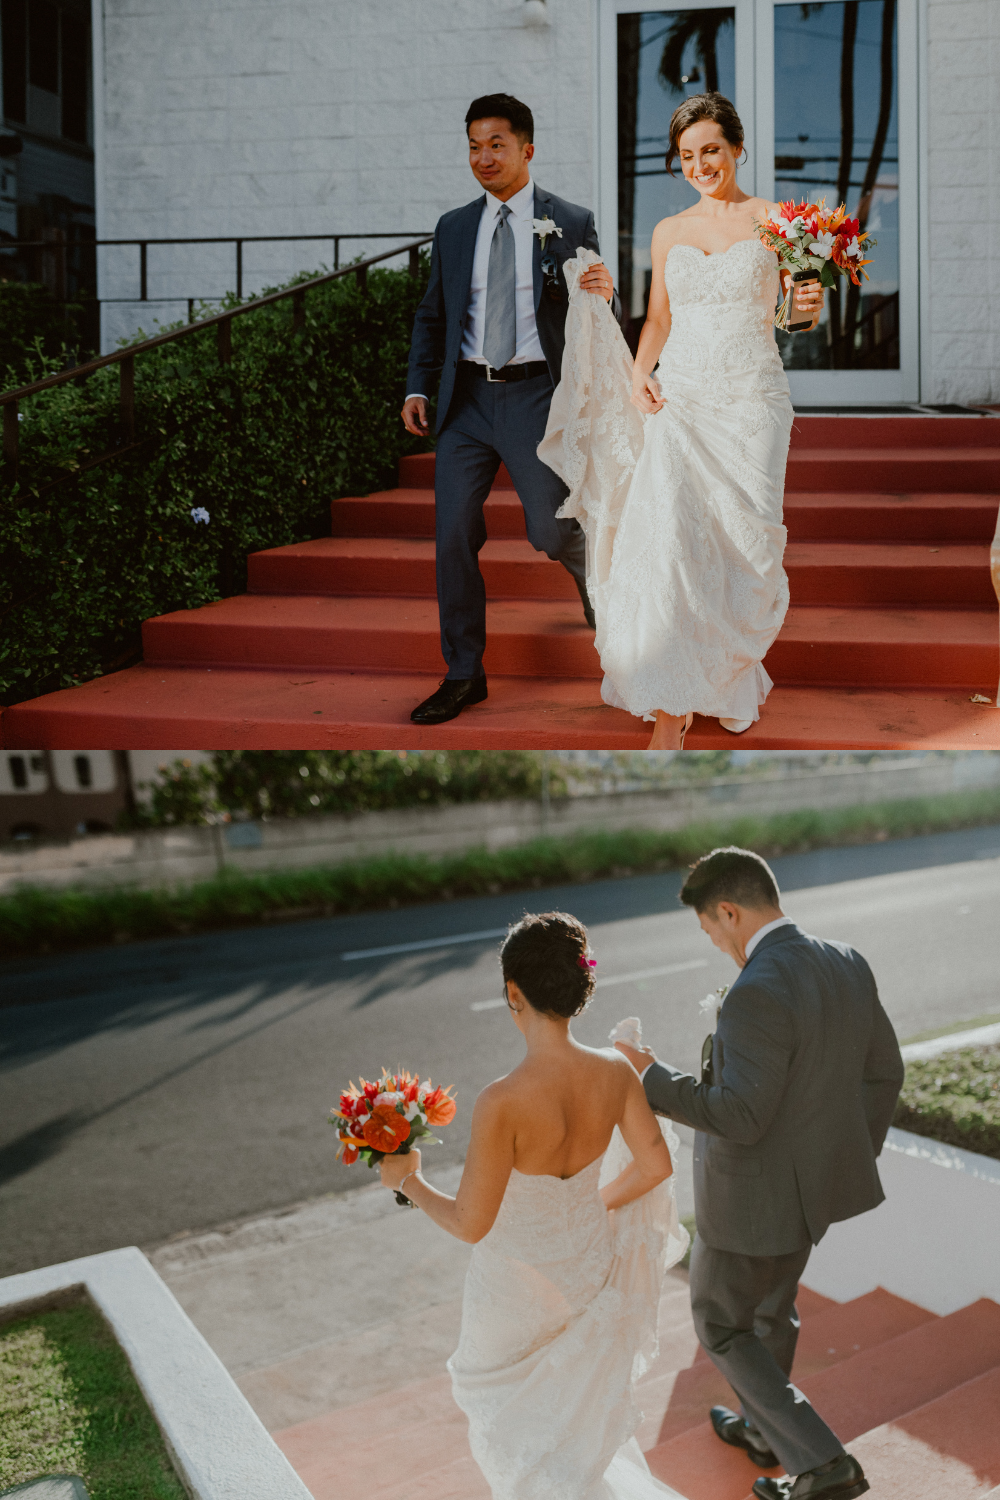 Bride and groom leave their traditional church ceremony in Oahu, Hawaii. They walk down stairs in front of the white brick church as the groom holds the bride's train and the bride holds her traditional Hawaii floral bouquet | Oahu Wedding Photographer, Oahu Elopement Photographer, Destination Wedding Photographer, Destination Elopement Photographer, Newlywed moments ideas, Newlywed Photography inspiration, Hawaii Elopement ideas | chelseaabril.com